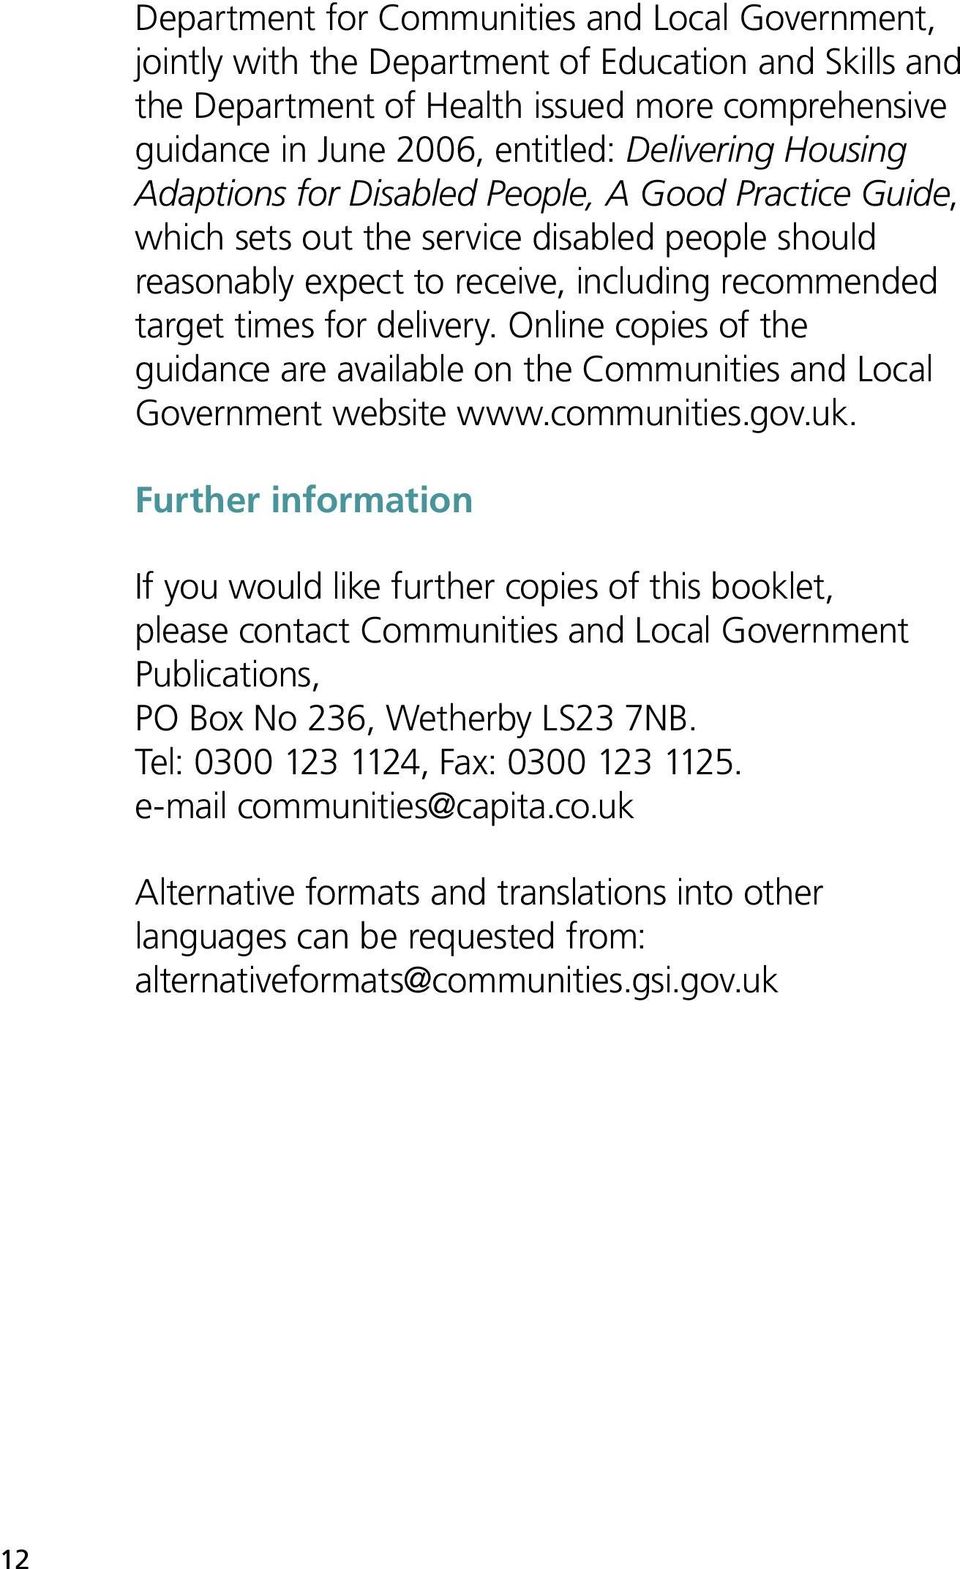 Online copies of the guidance are available on the Communities and Local Government website www.communities.gov.uk.